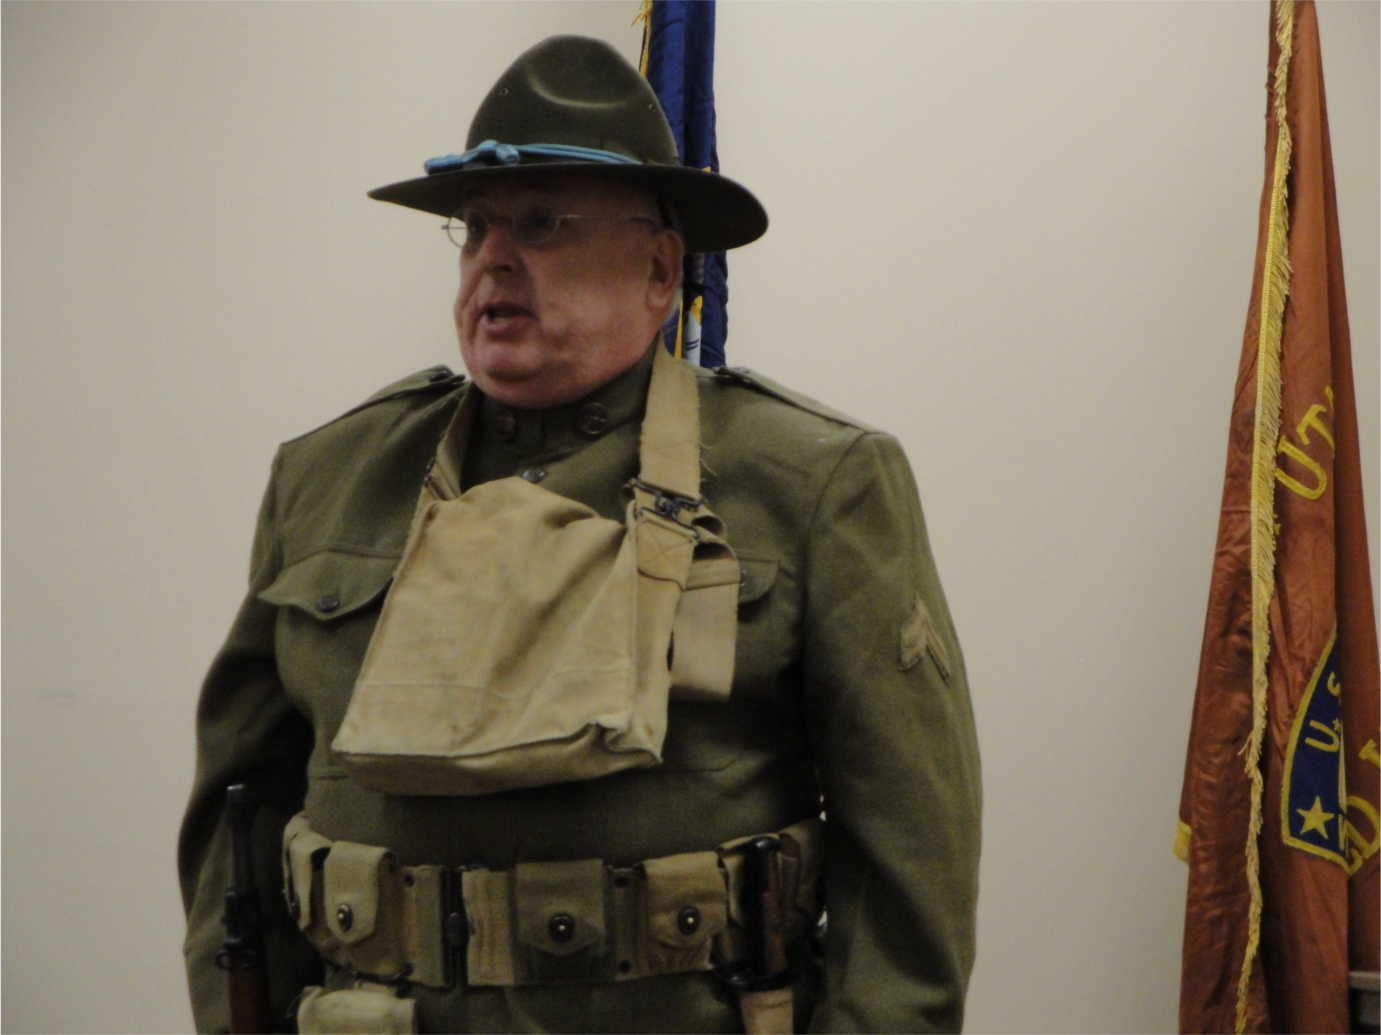 A World War I reenactor participated in the opening reception for *World War I and America* at Brigham City Library. Image courtesy of the Brigham City Library.